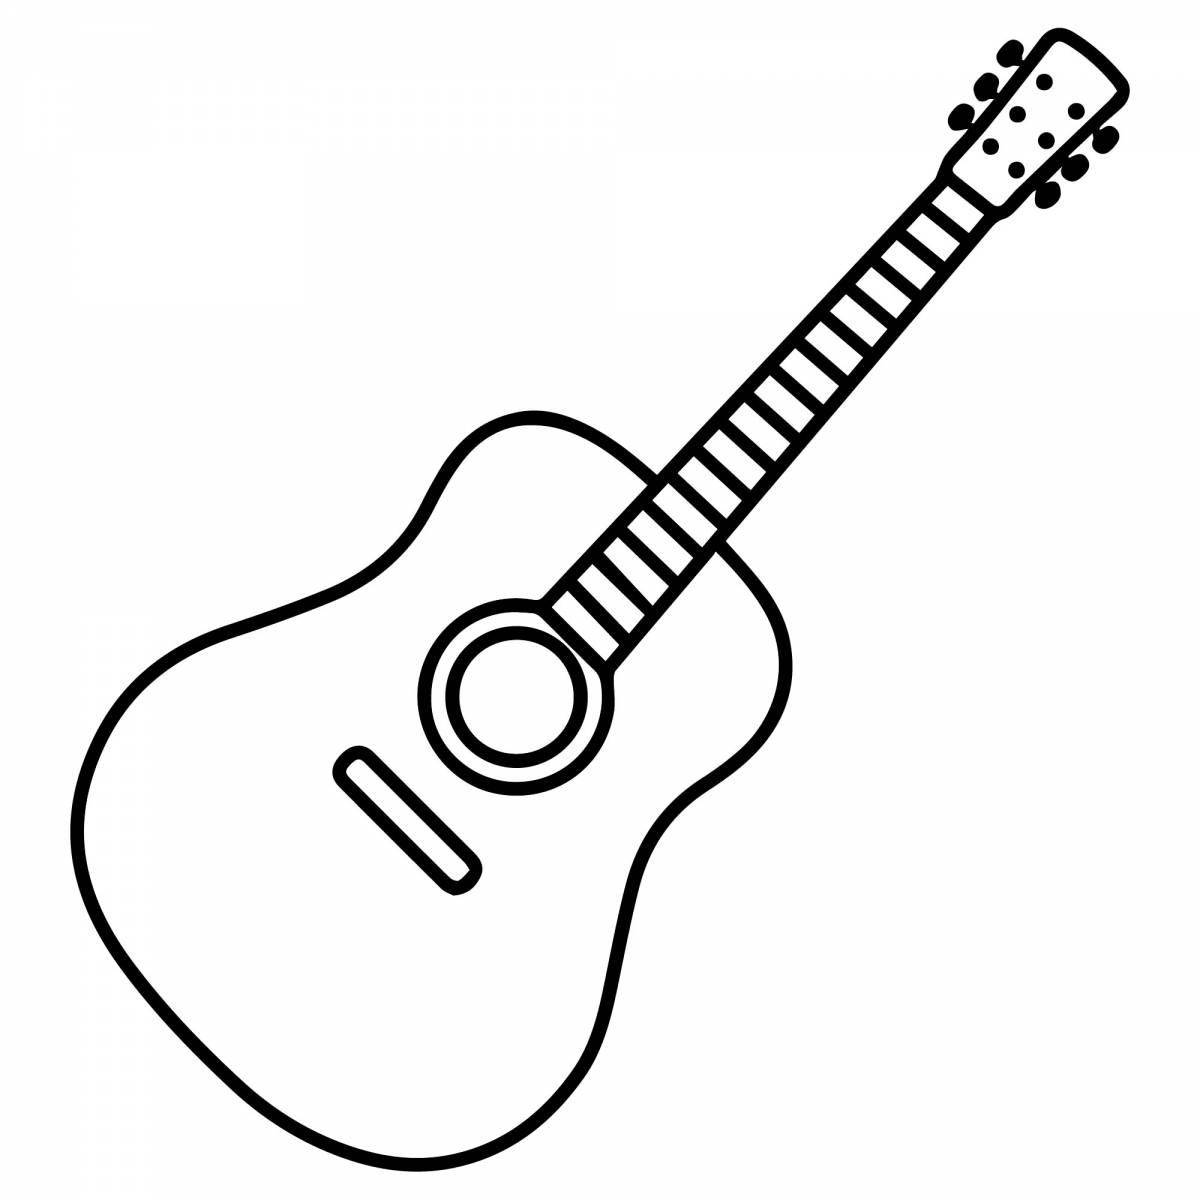 Electric guitar coloring page